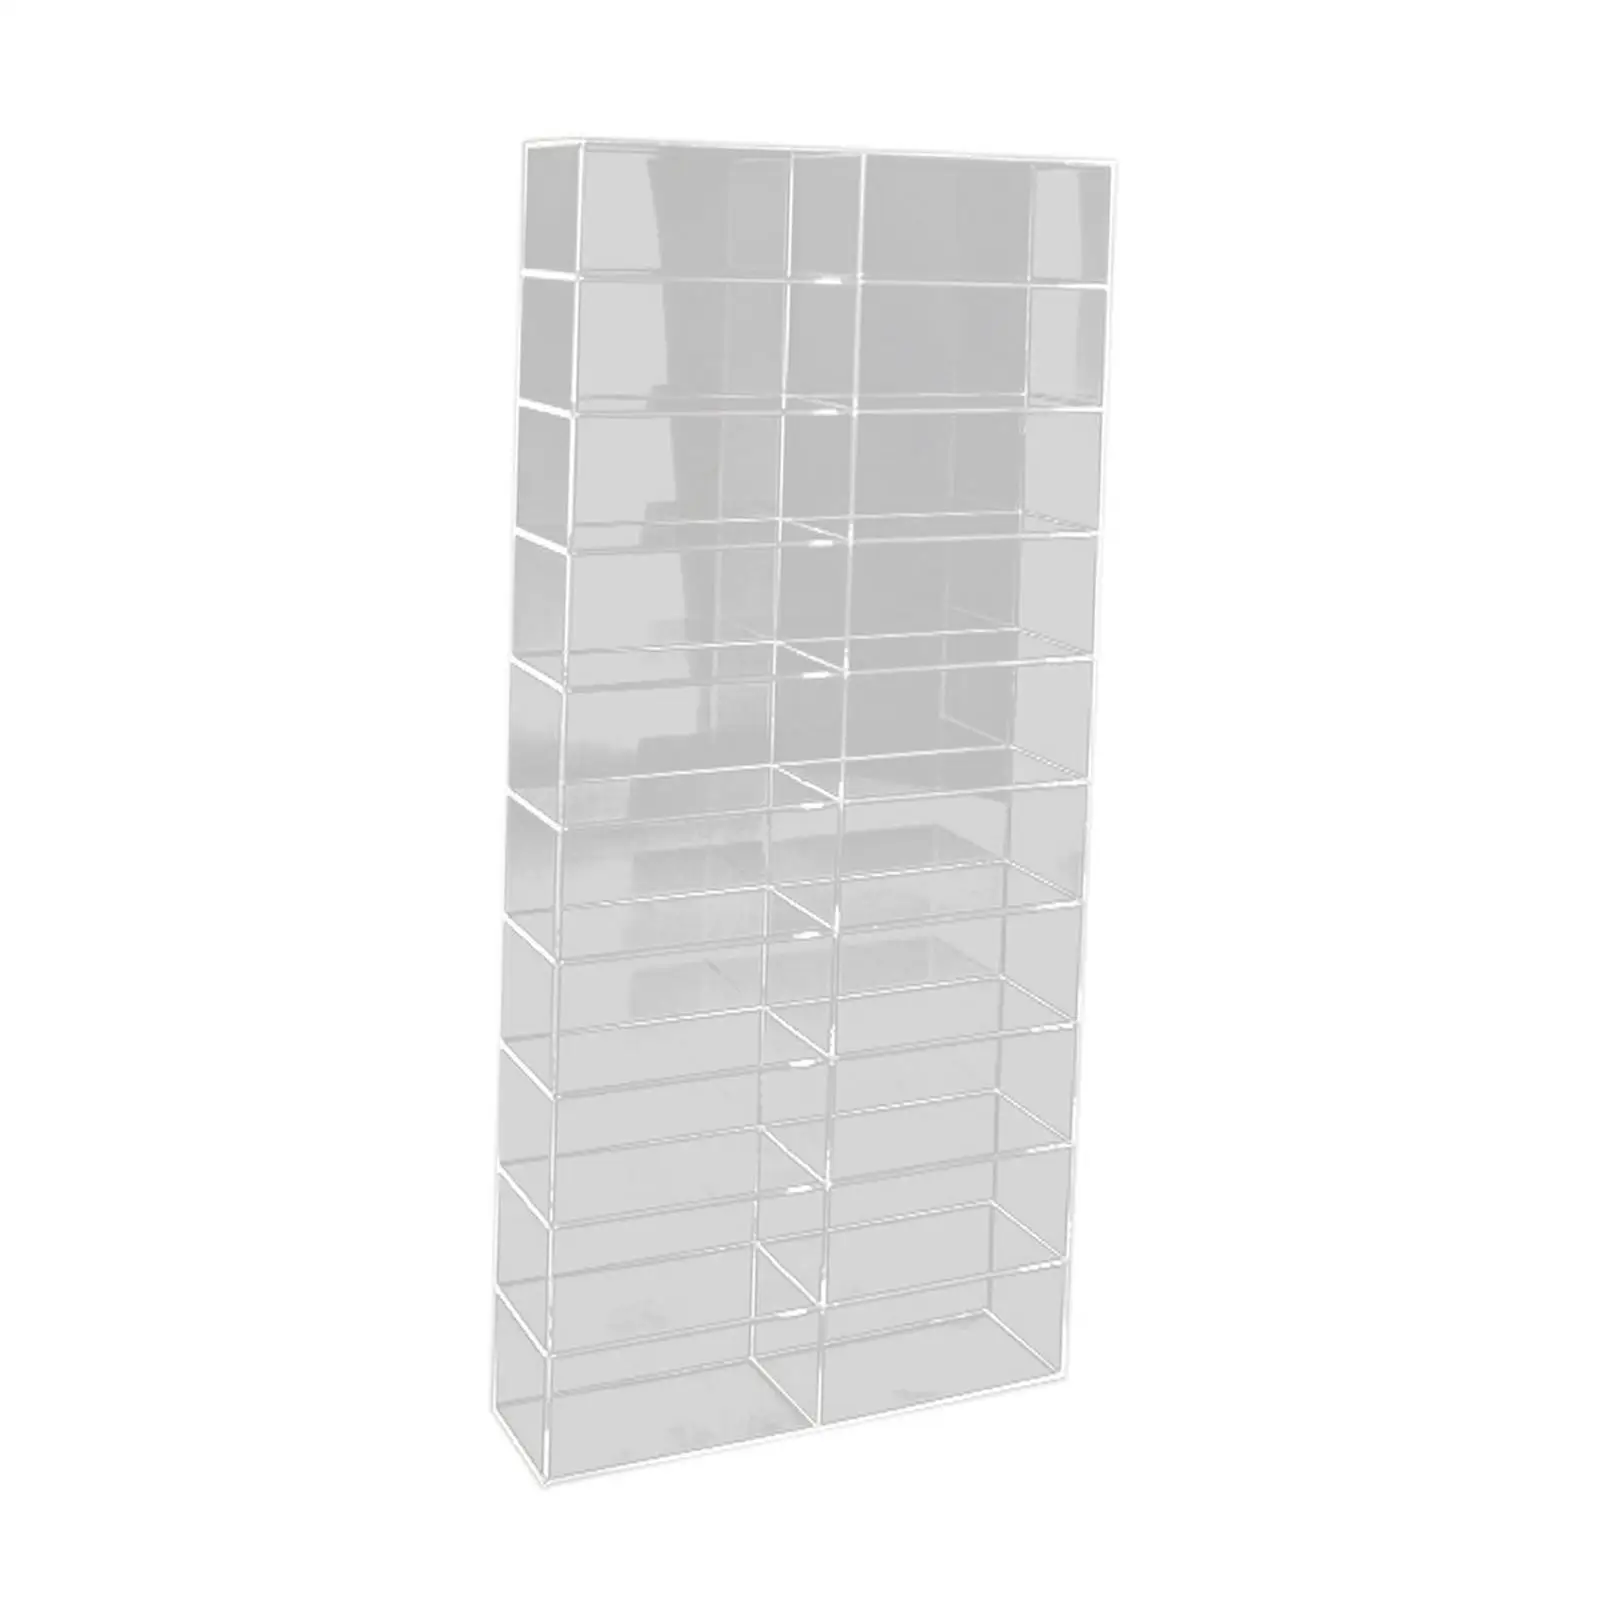 1/64 Scale Model Car Display Case Collection Organizer Holder for Figures